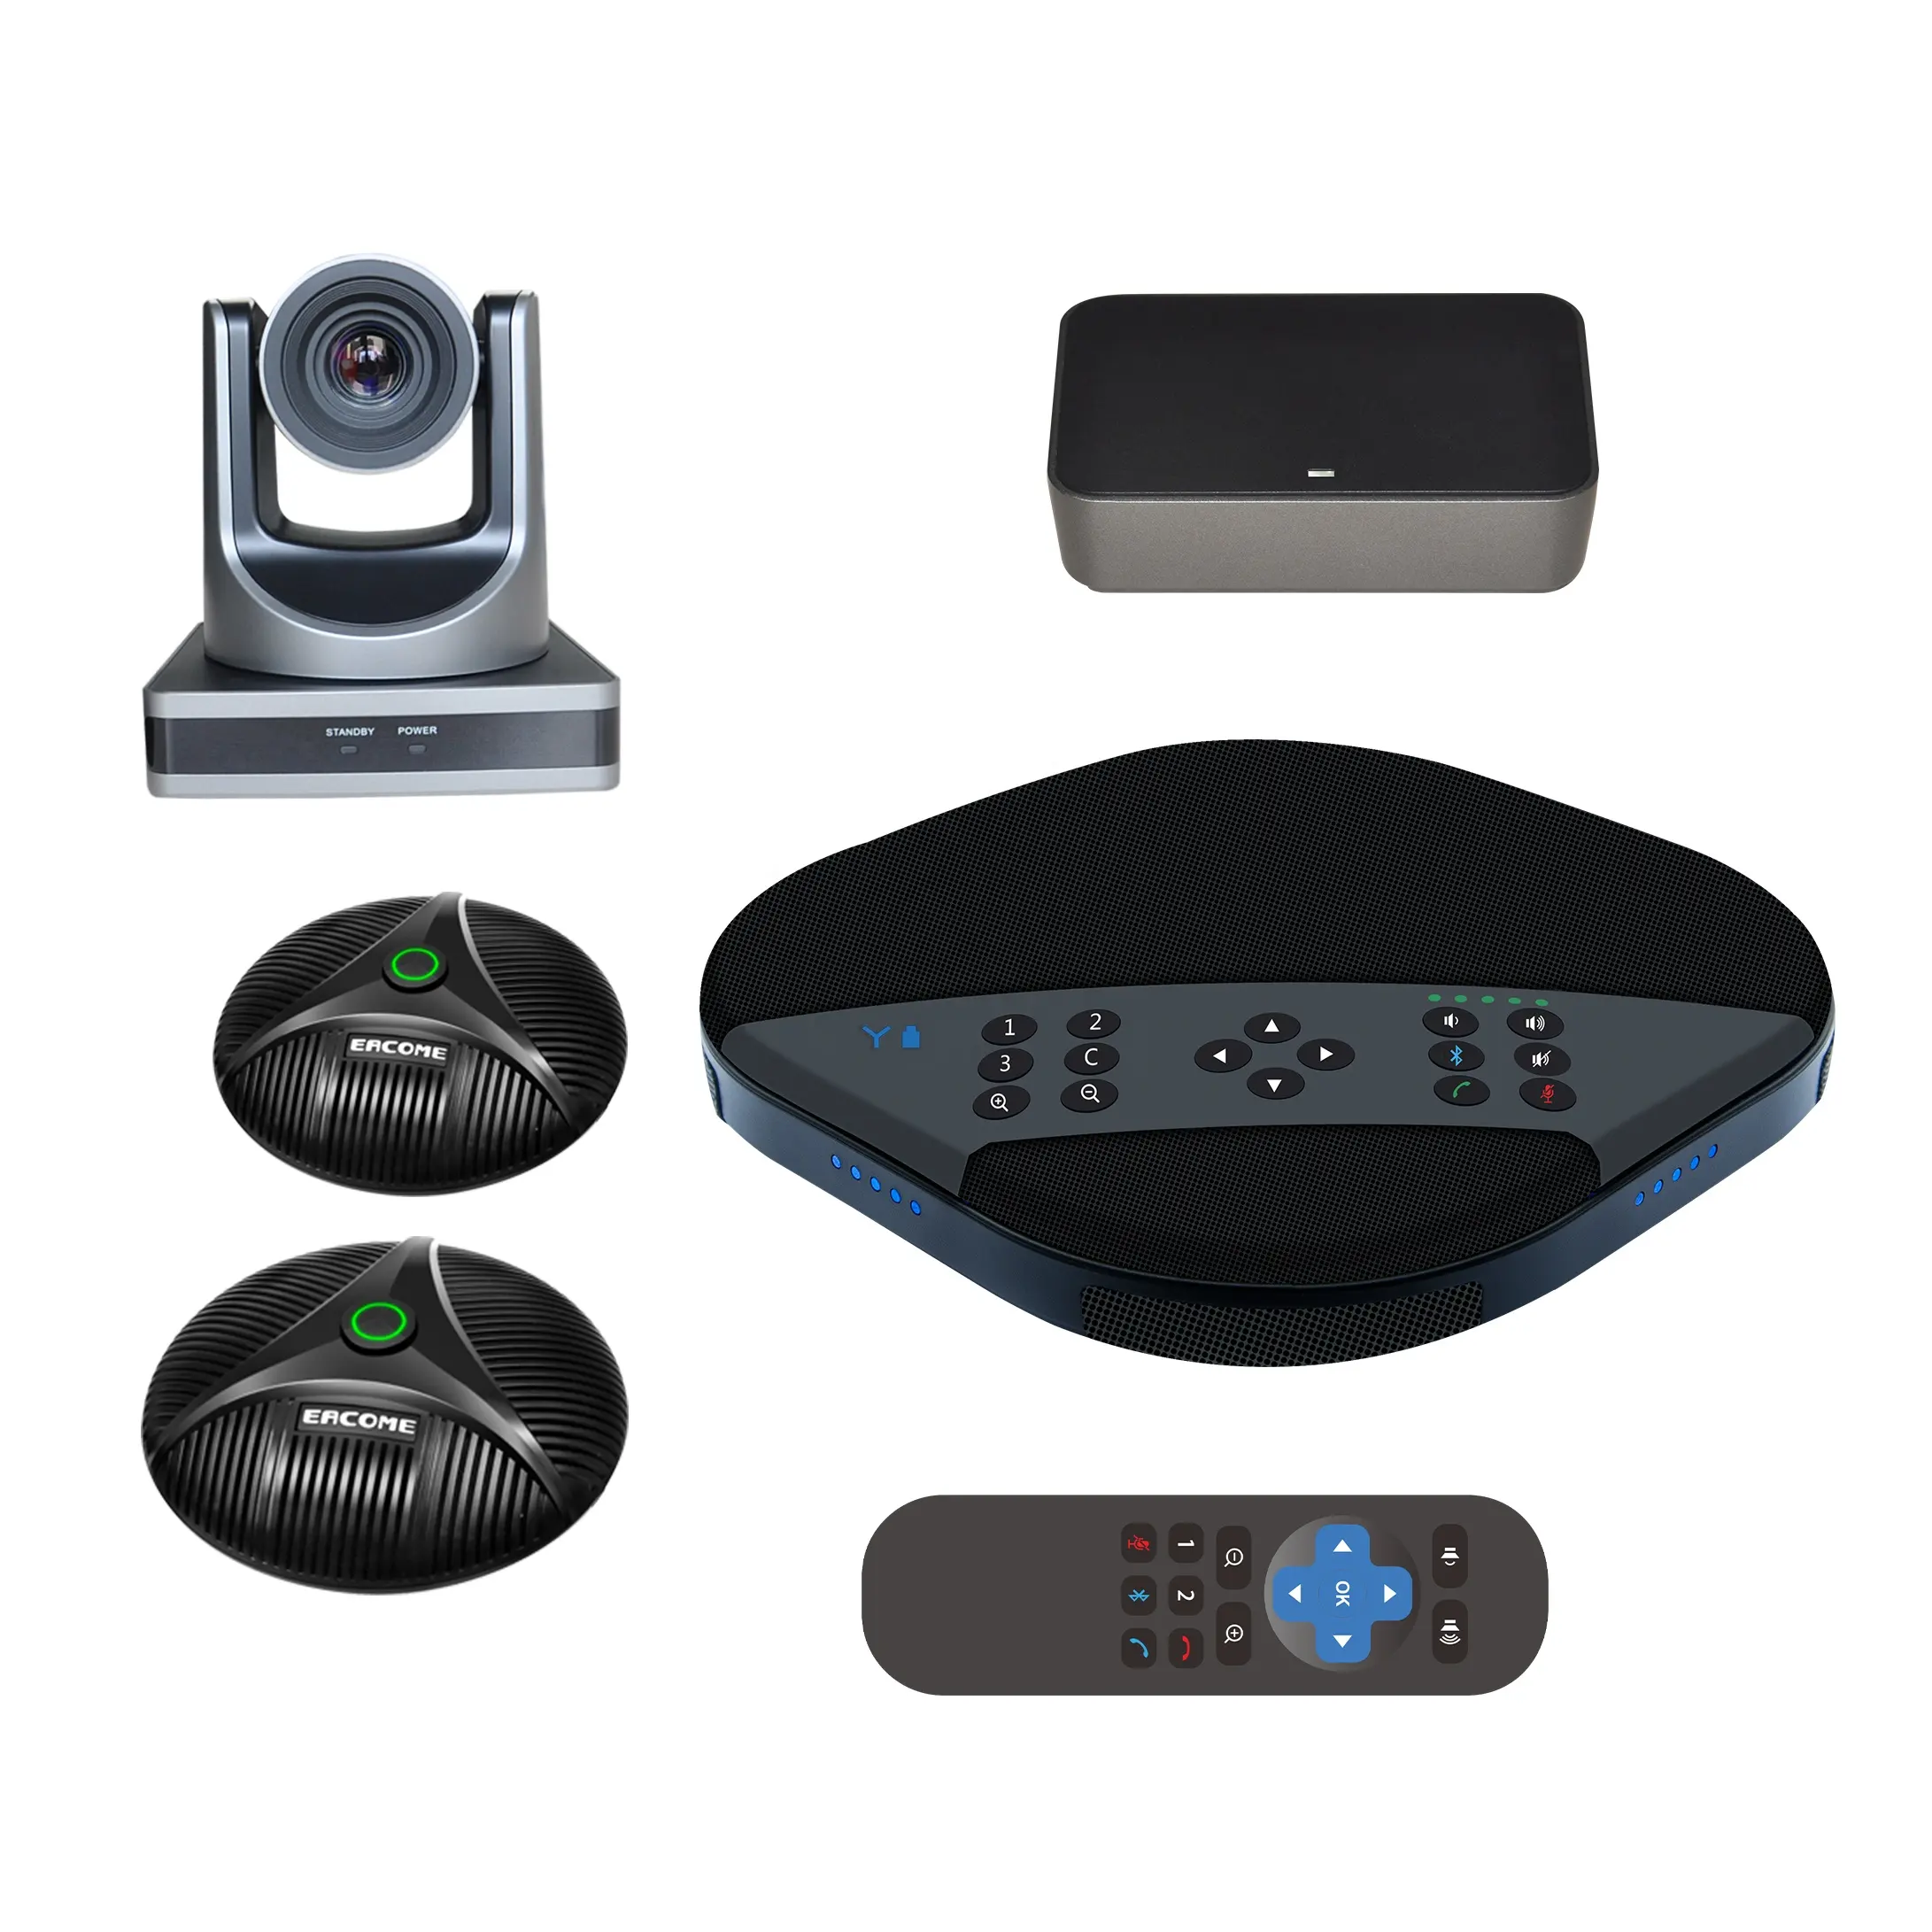 1080P/30fps Video Conference System HD Audio And Camera for Conference Room 50-60 Square Meters.